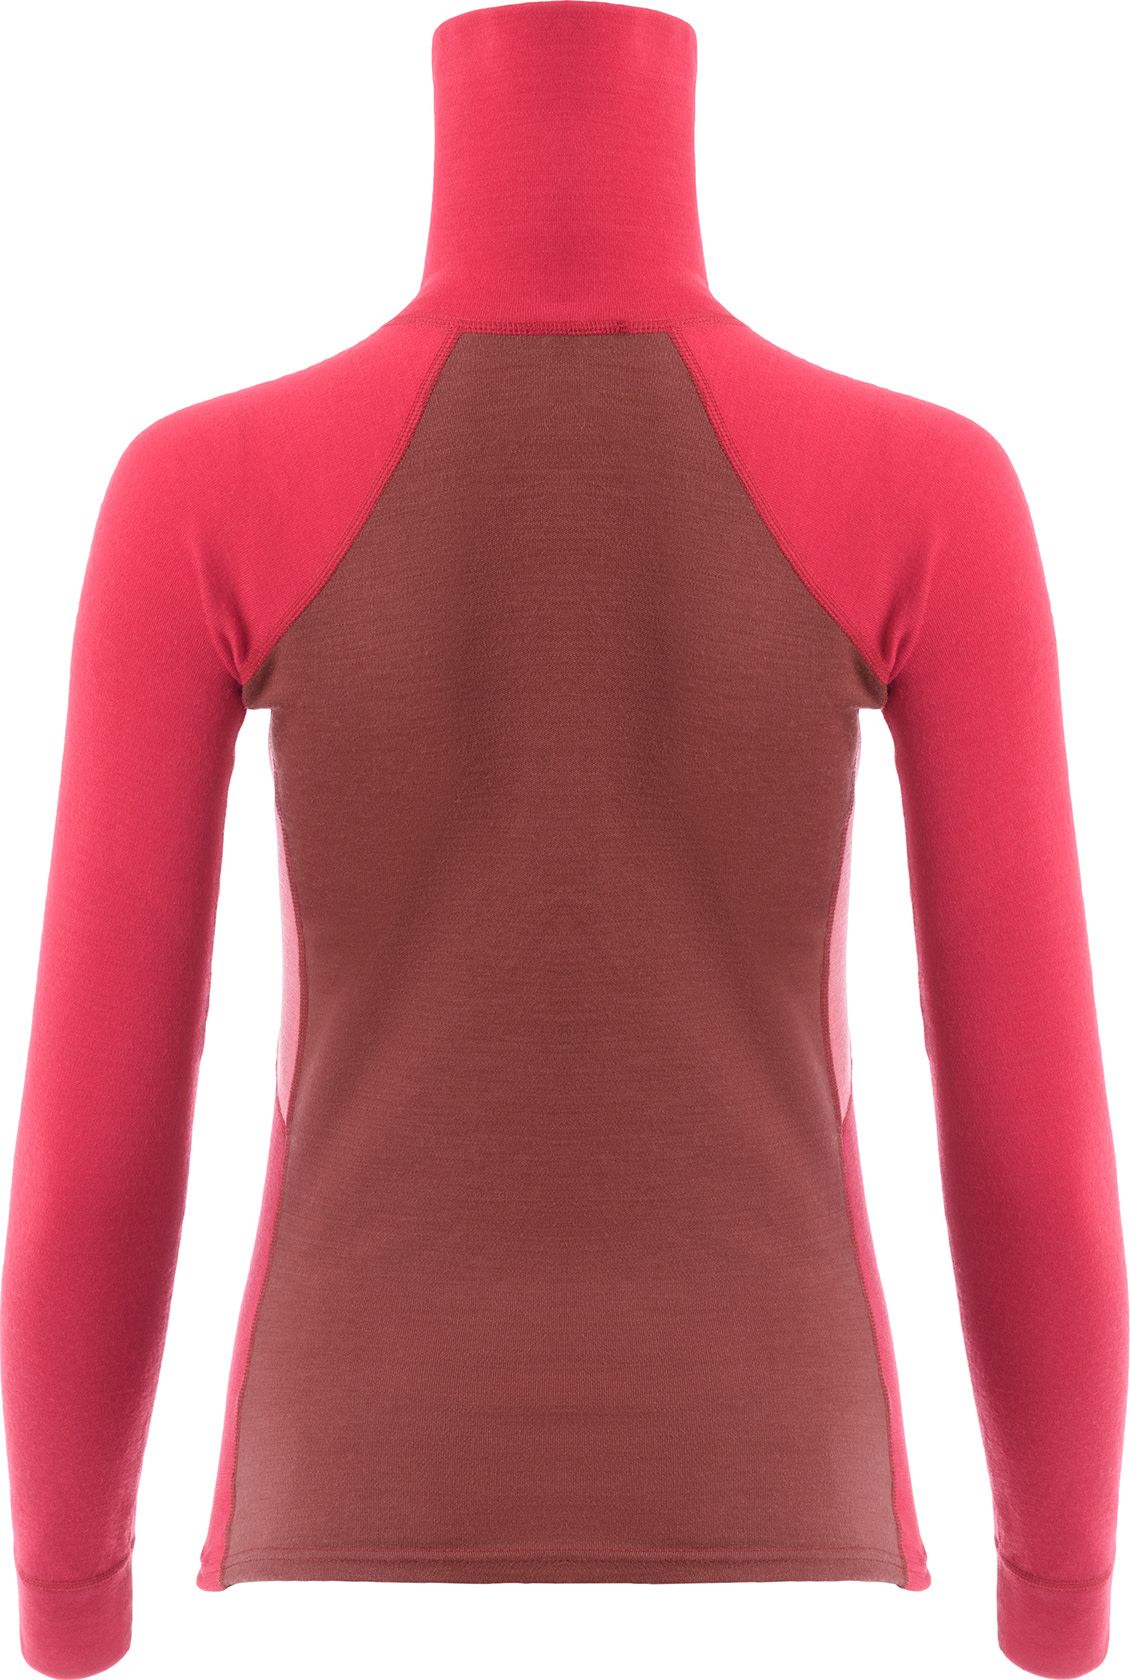 Women's WarmWool Polo Jester Red/Spiced Apple/Spiced Coral